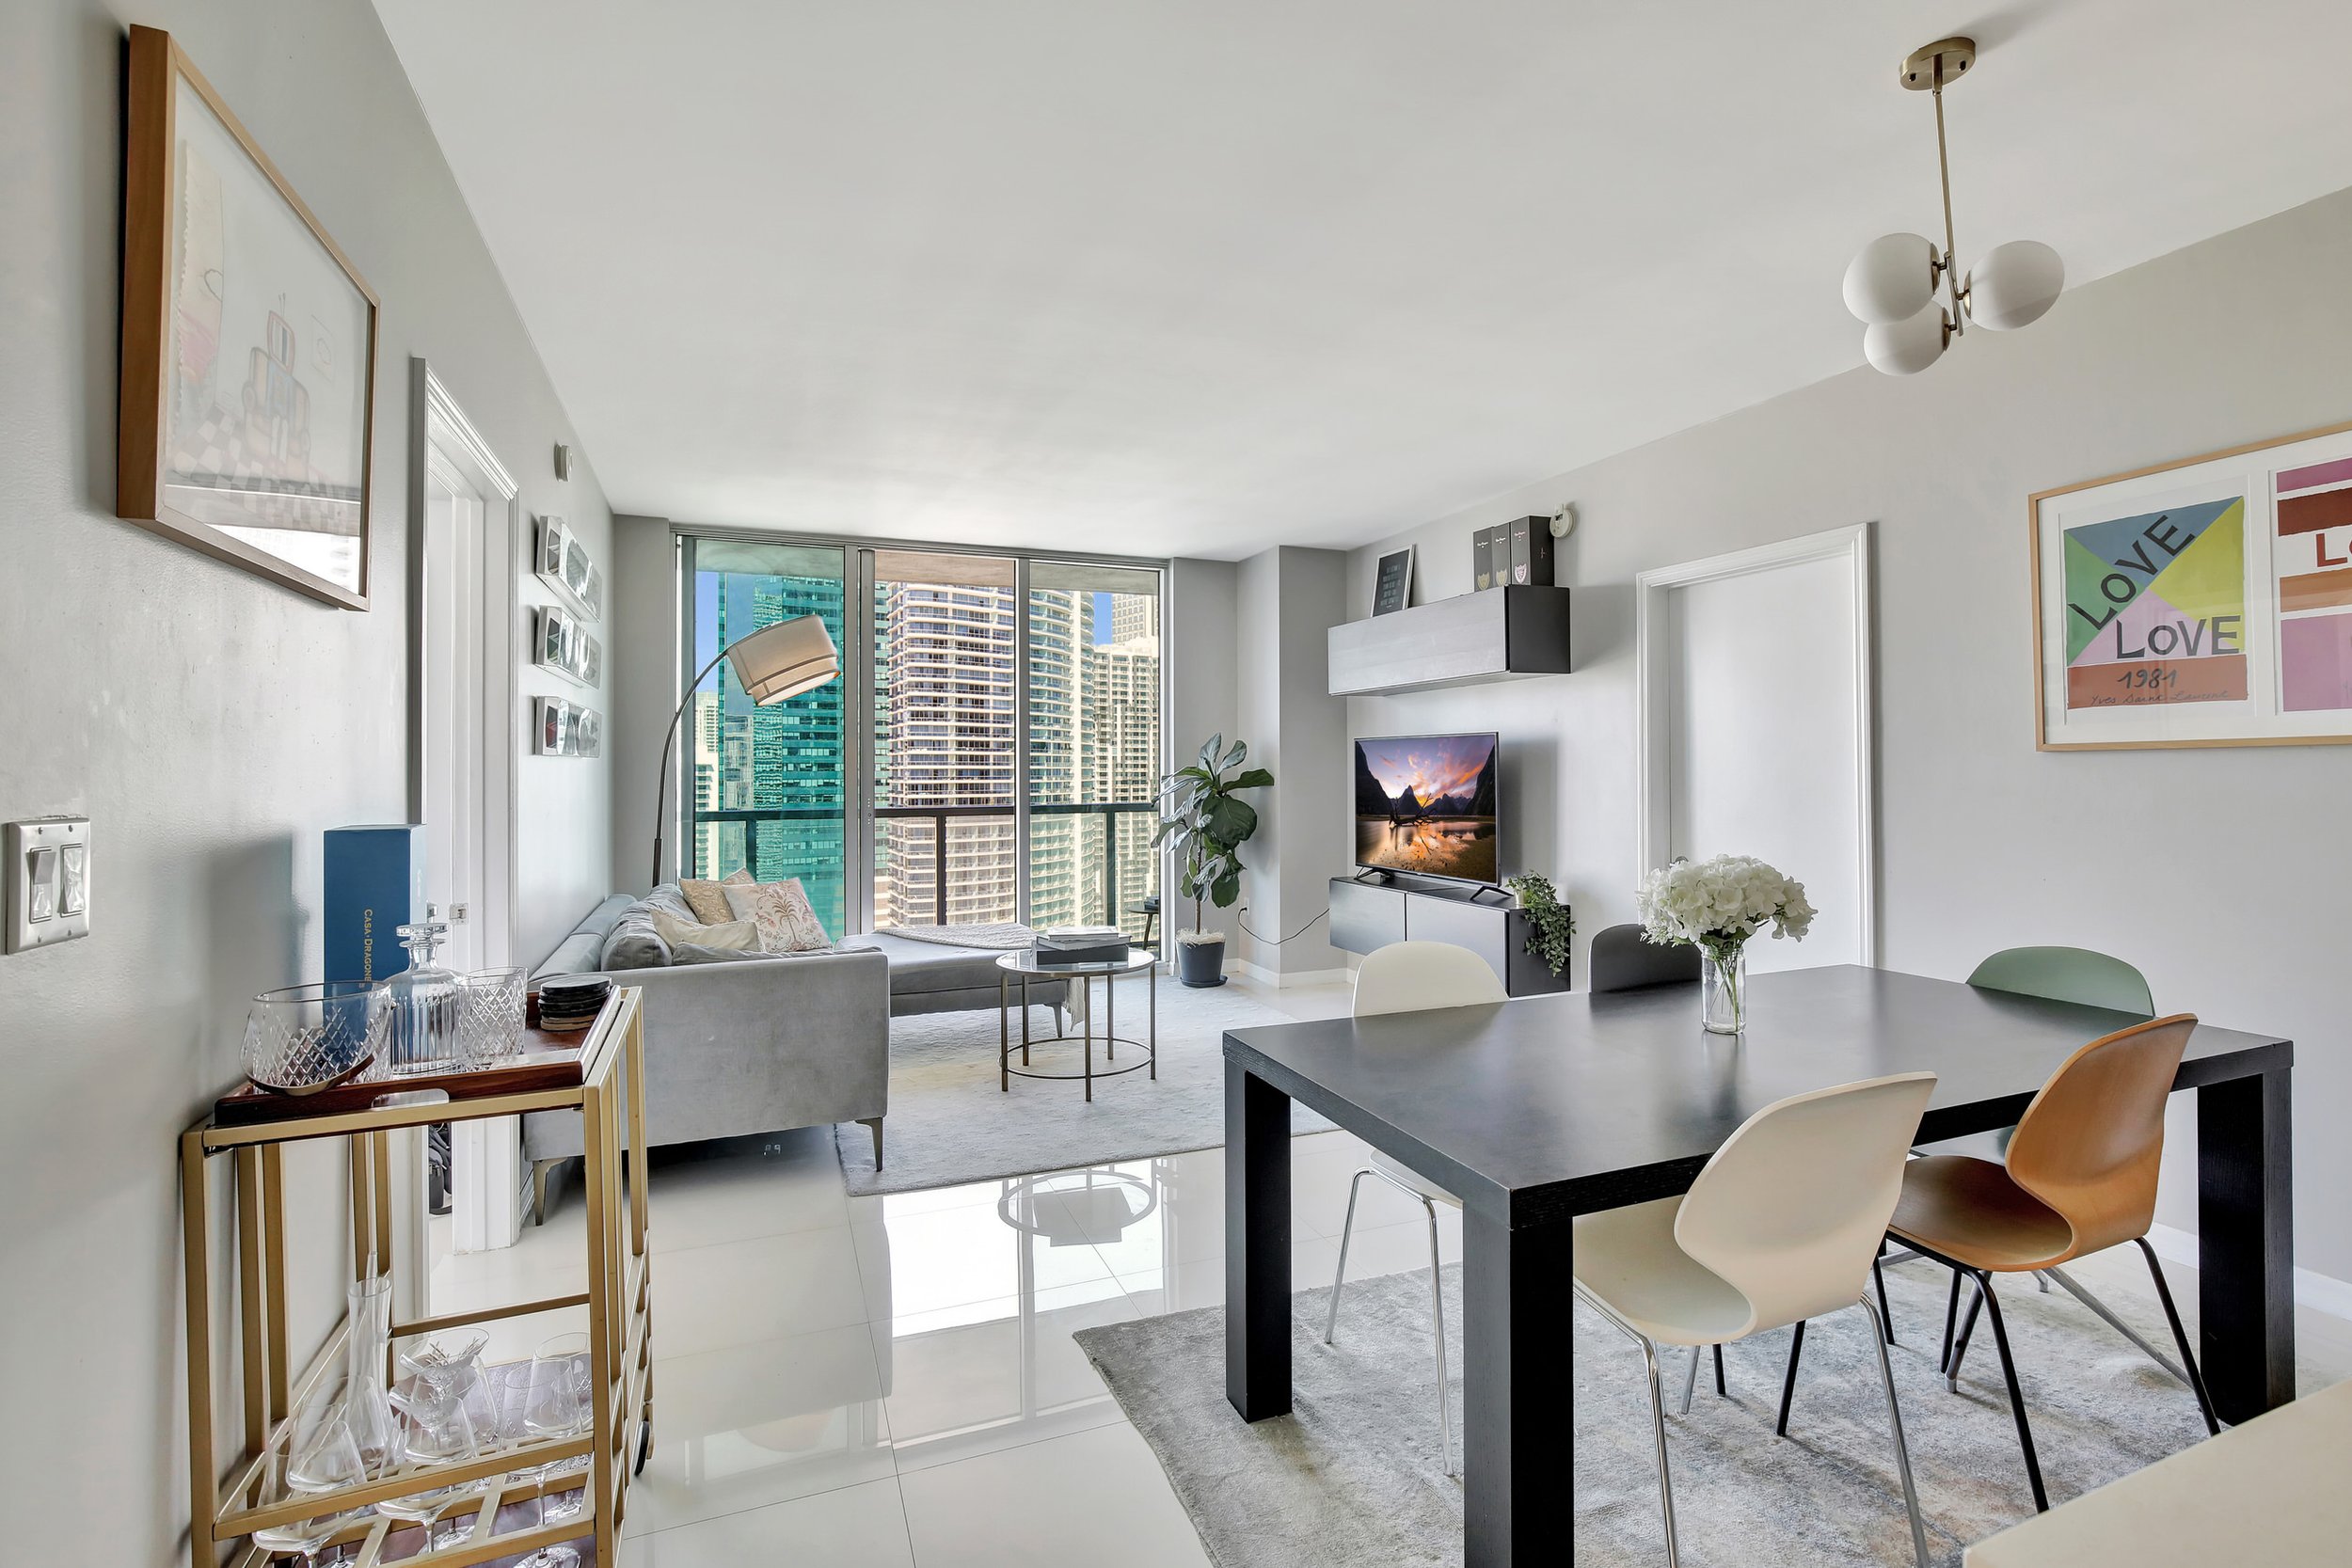 Check Out This Two-Bedroom Condo For Under $900K In Brickell 21.jpg